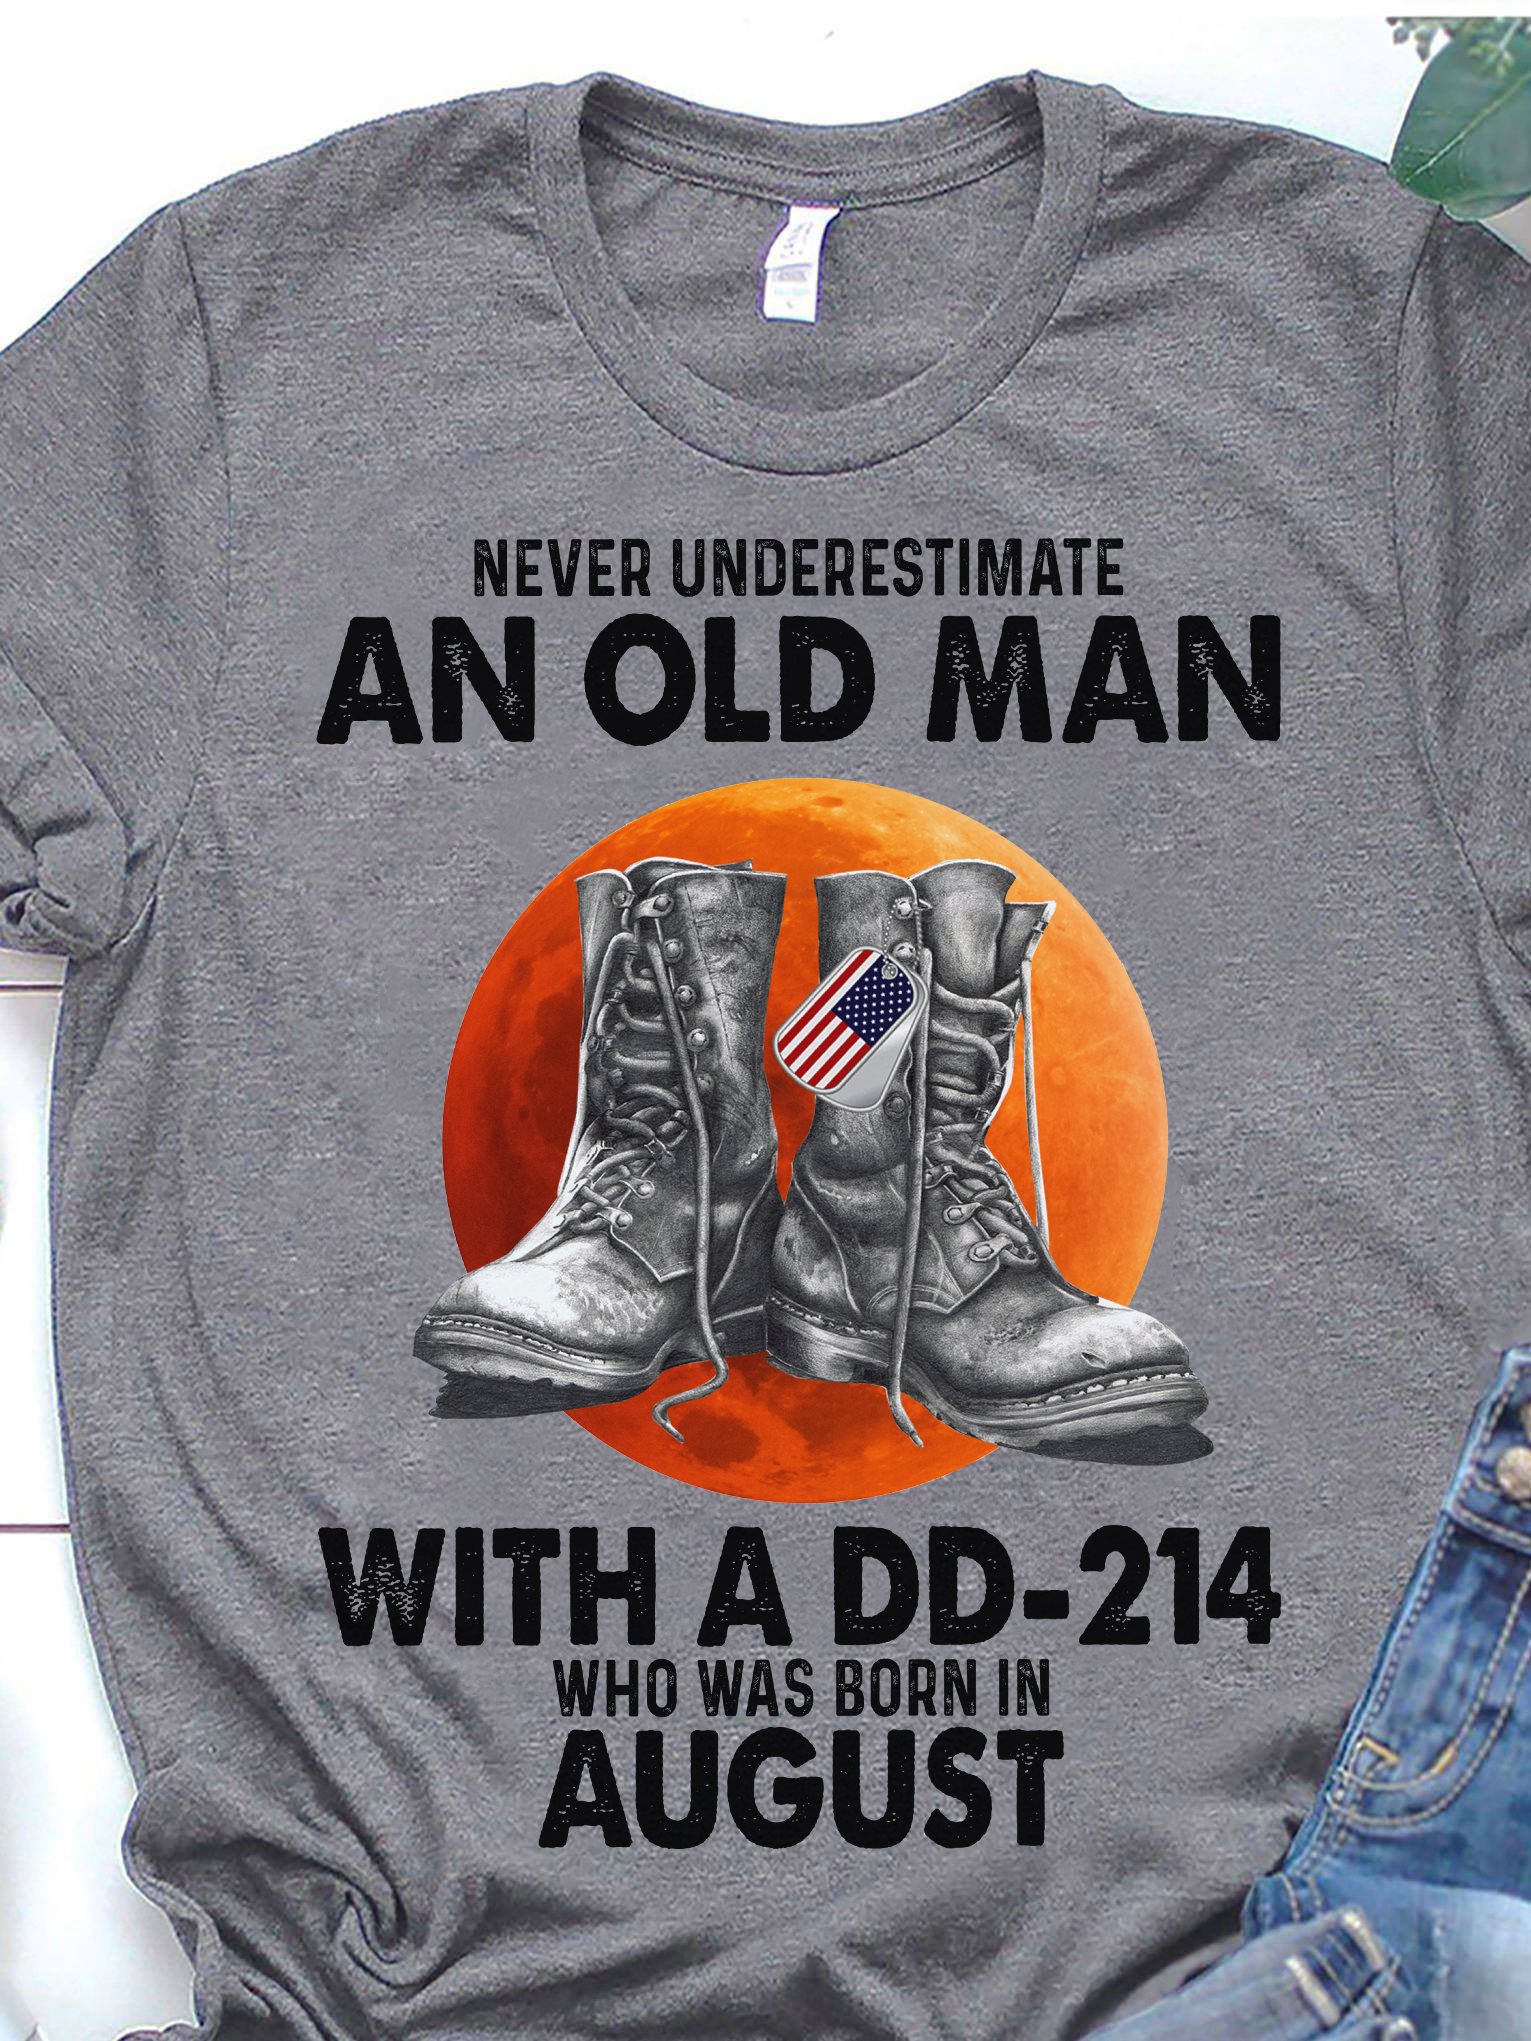 Never underestimate an old woman with a DD-214 who was born in August